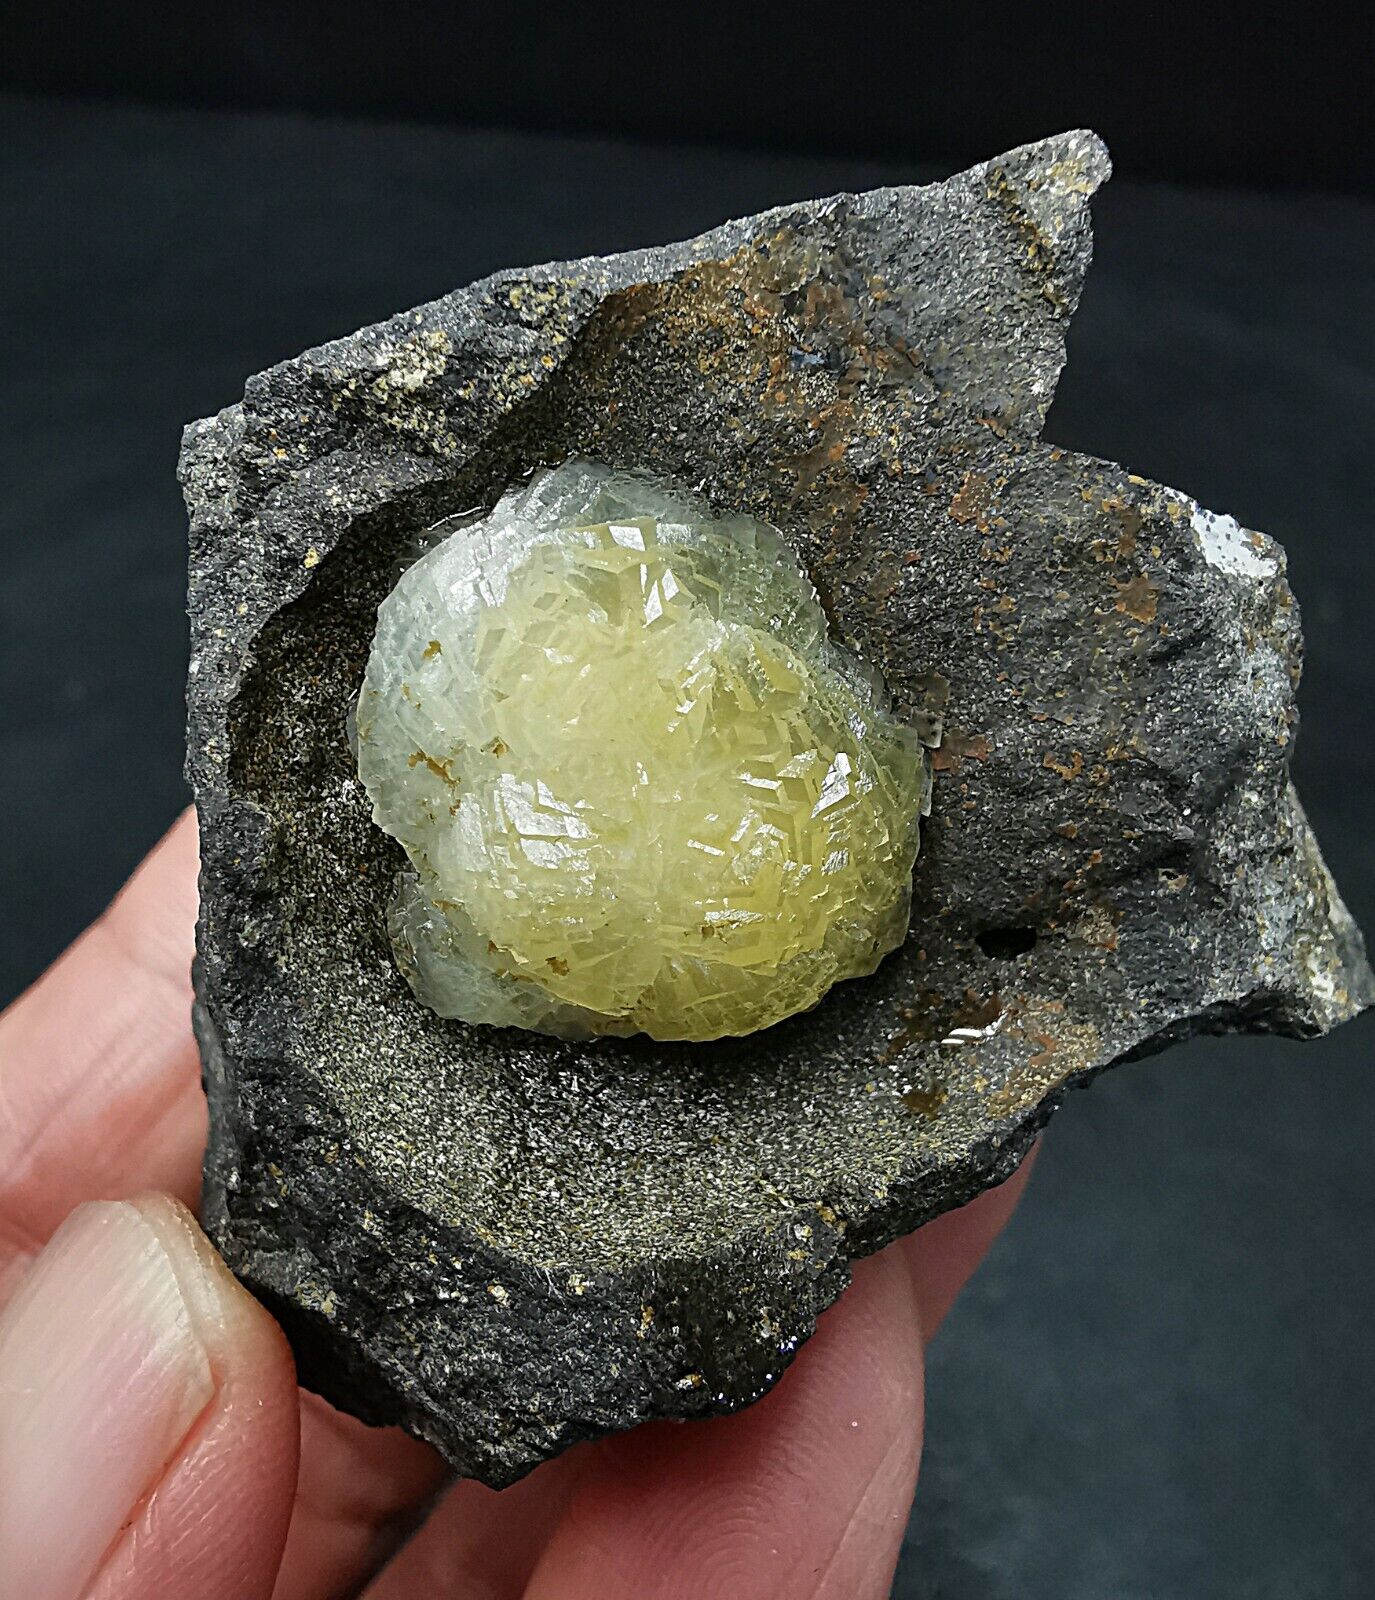 99g Natural Rare Spherical Calcite Crystal on Matrix from Mineral Specimen China